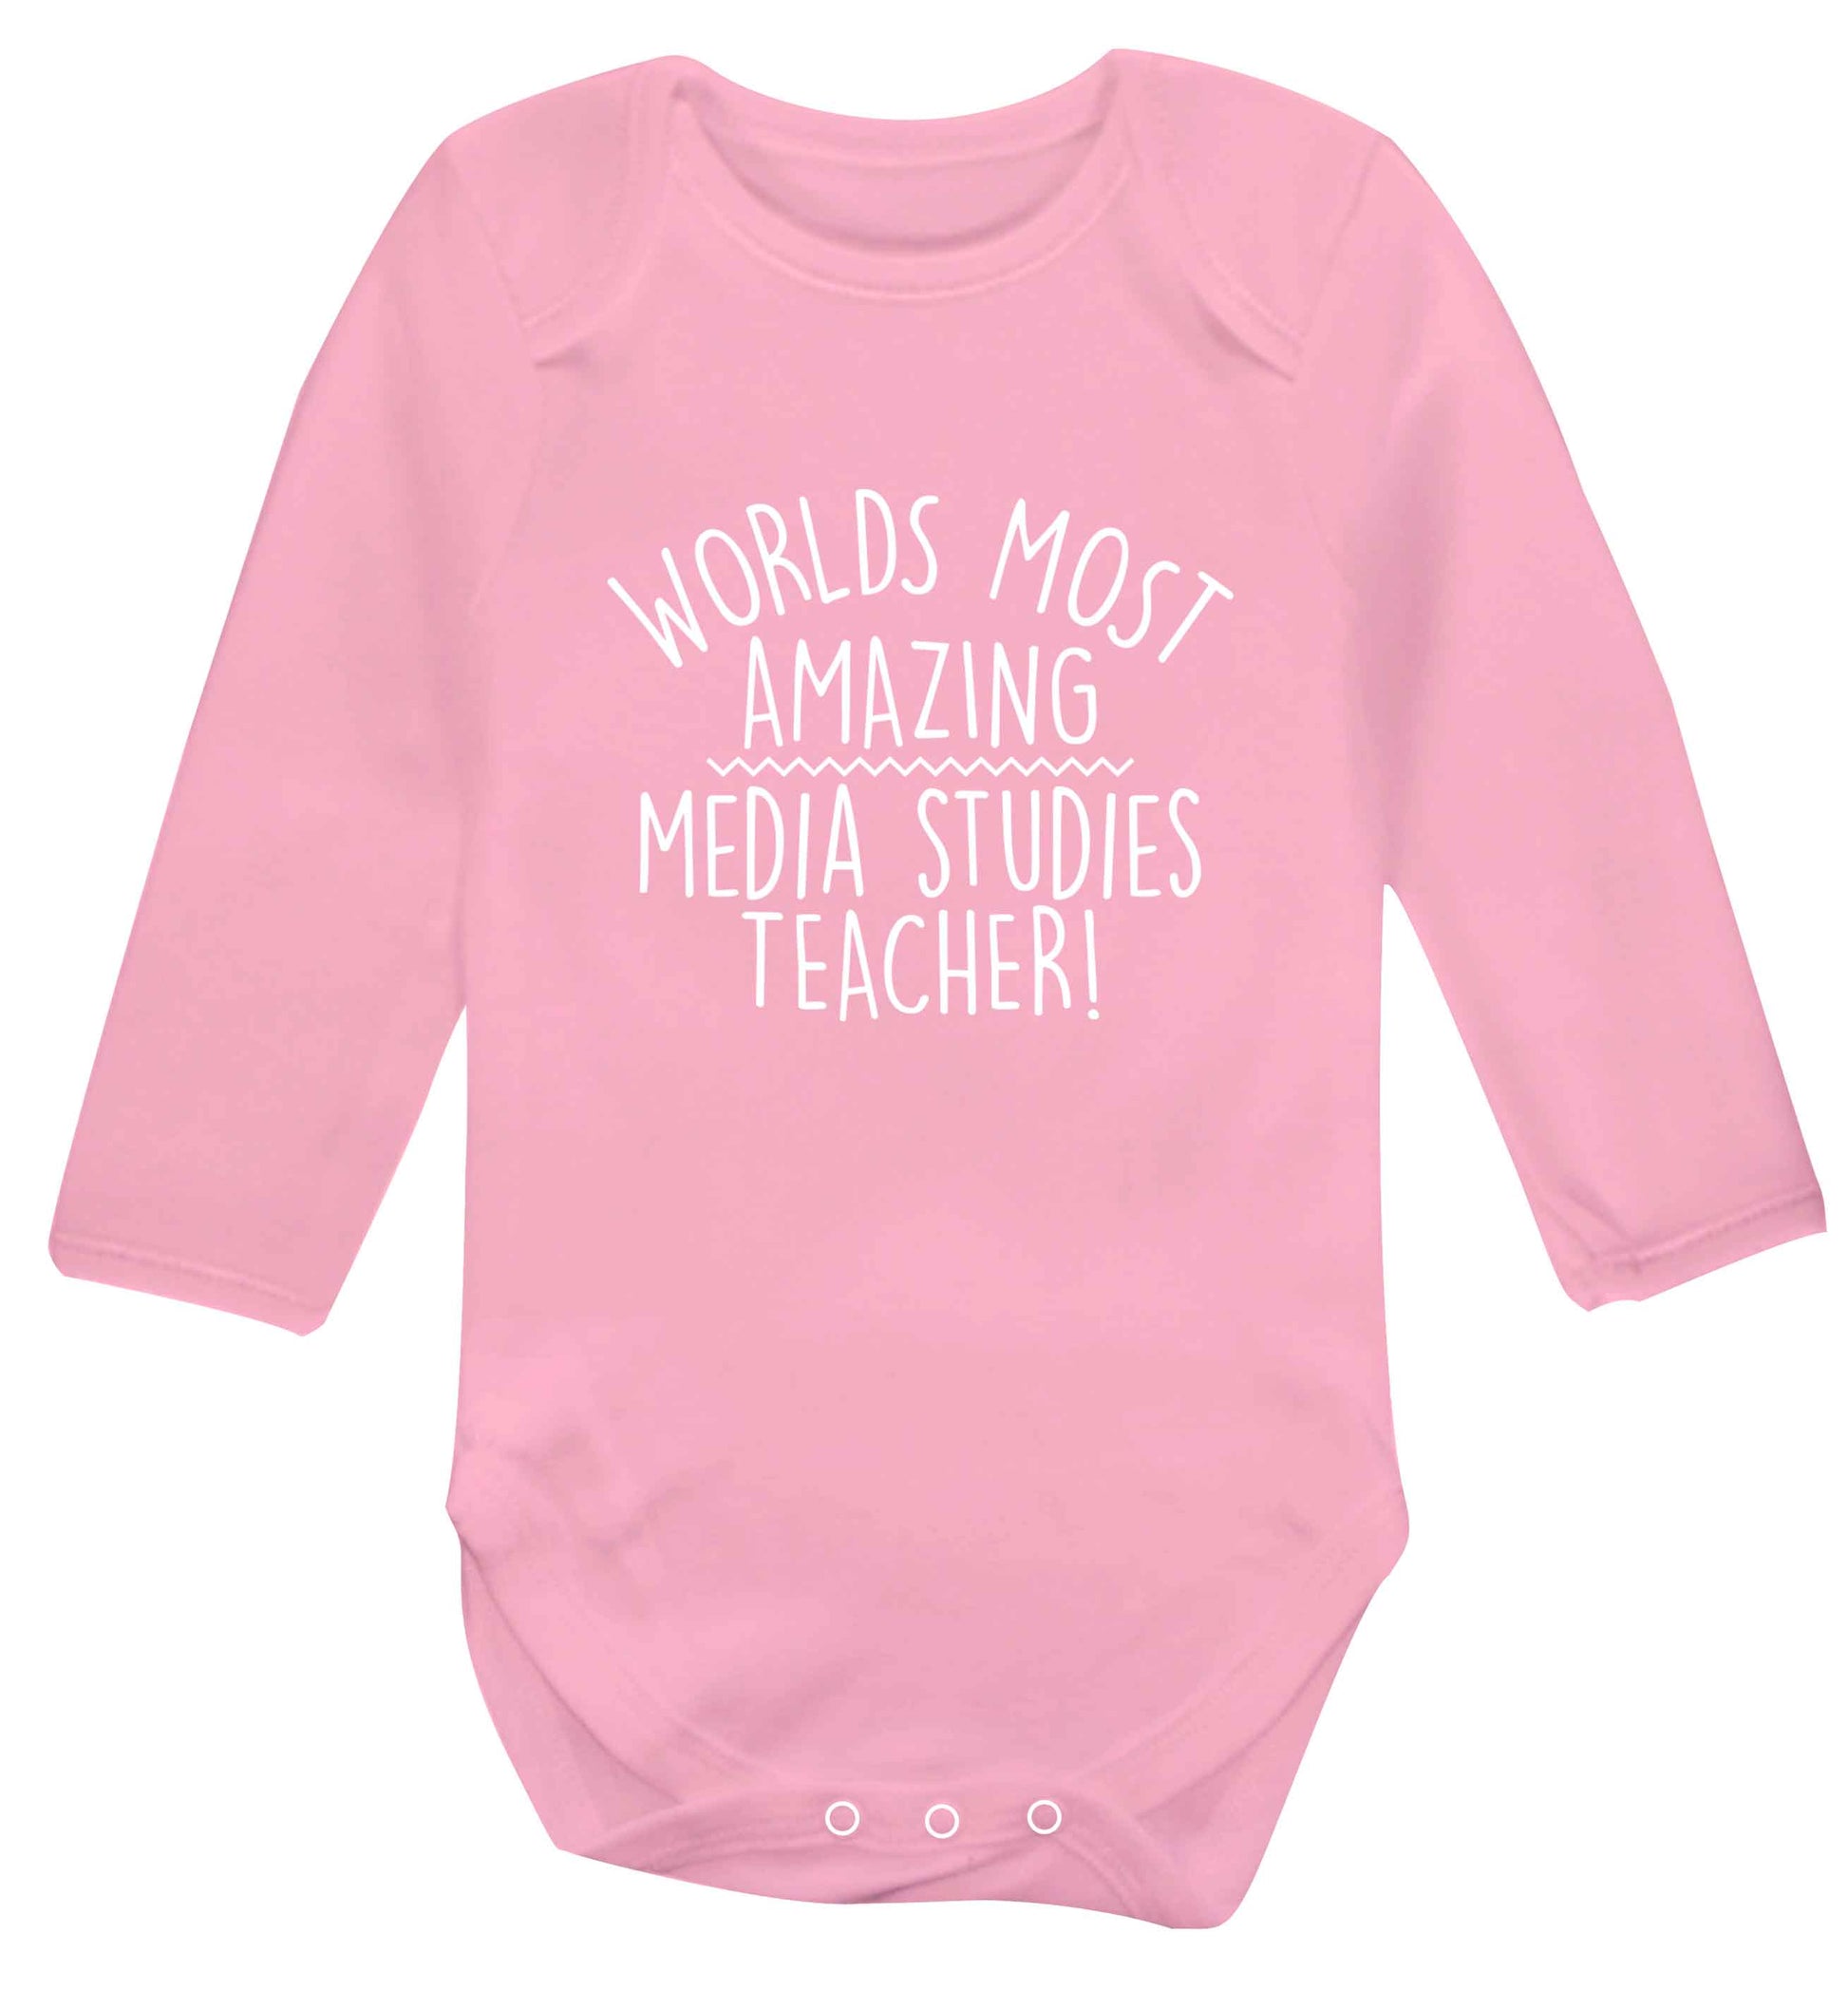 Worlds most amazing media studies teacher baby vest long sleeved pale pink 6-12 months